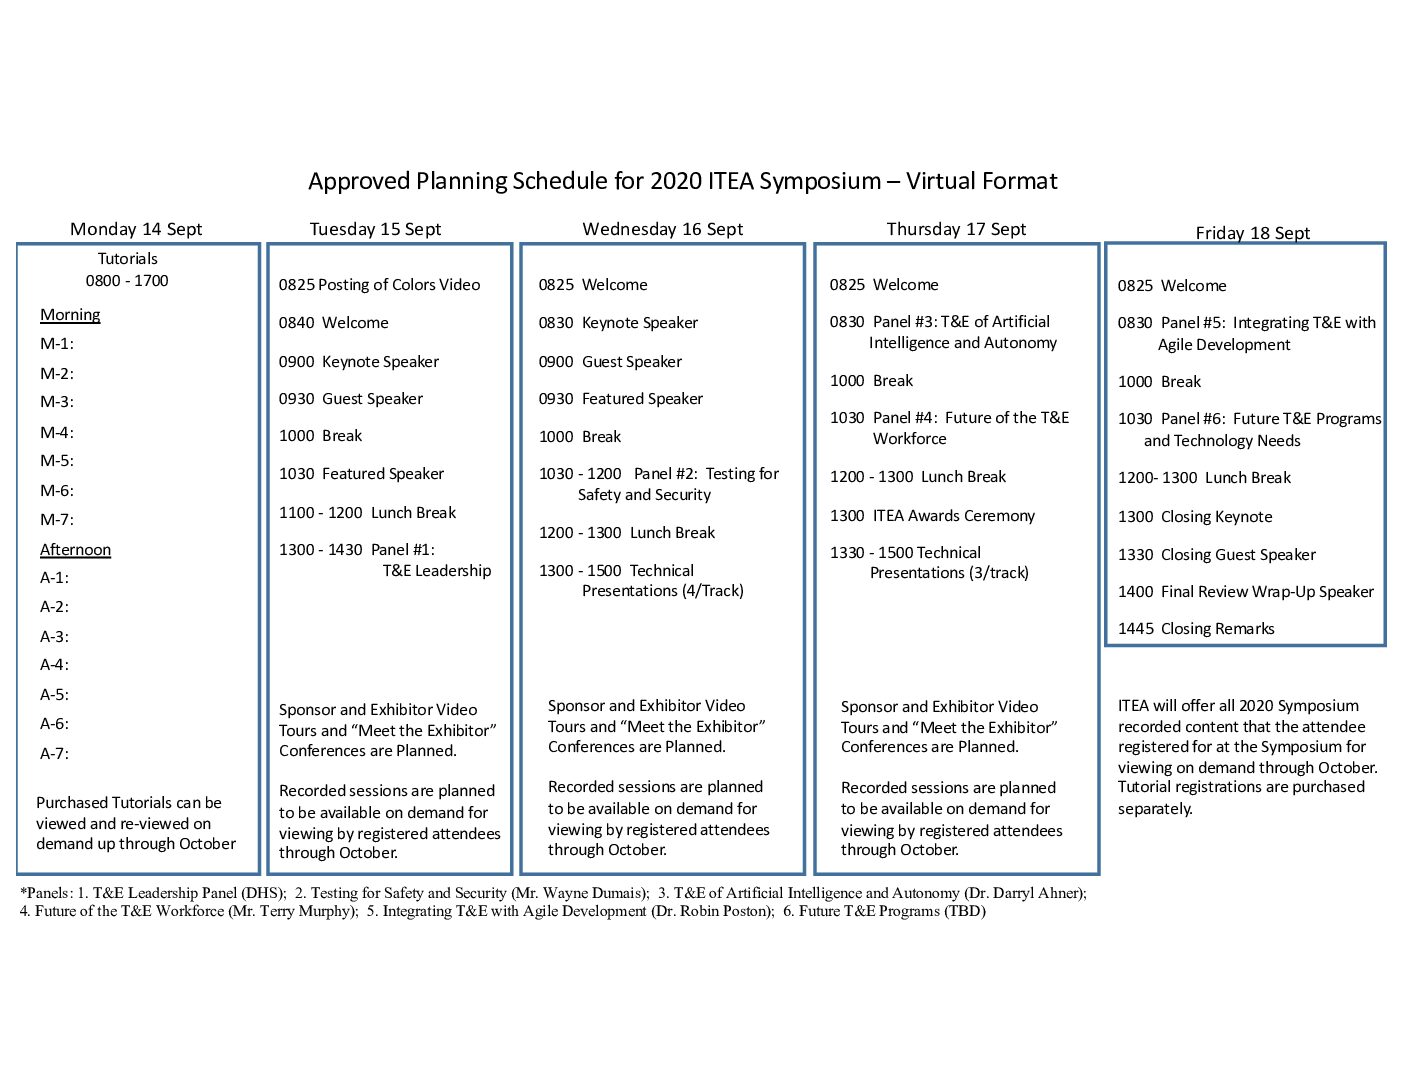 2020 Virtual Symposium Approved Schedule for the Virtual Format with On-Demand Recordings